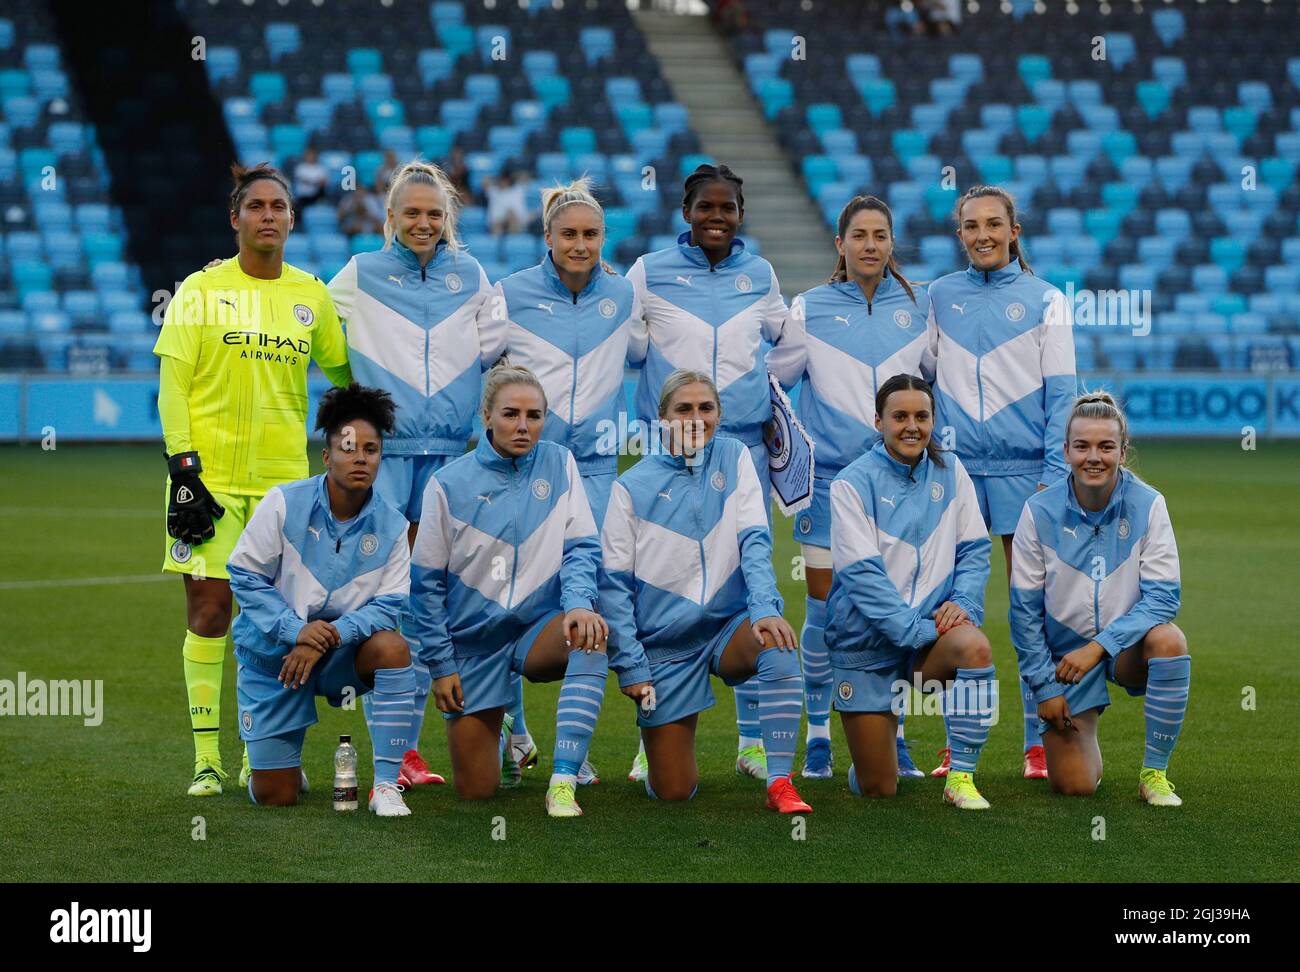 Manchester, England, 8th September 2021. Manchester City women’s team pose for a team photography before  the UEFA Women’s Champions League match at the Academy Stadium, Manchester. Picture credit should read: Darren Staples / Sportimage Credit: Sportimage/Alamy Live News Stock Photo